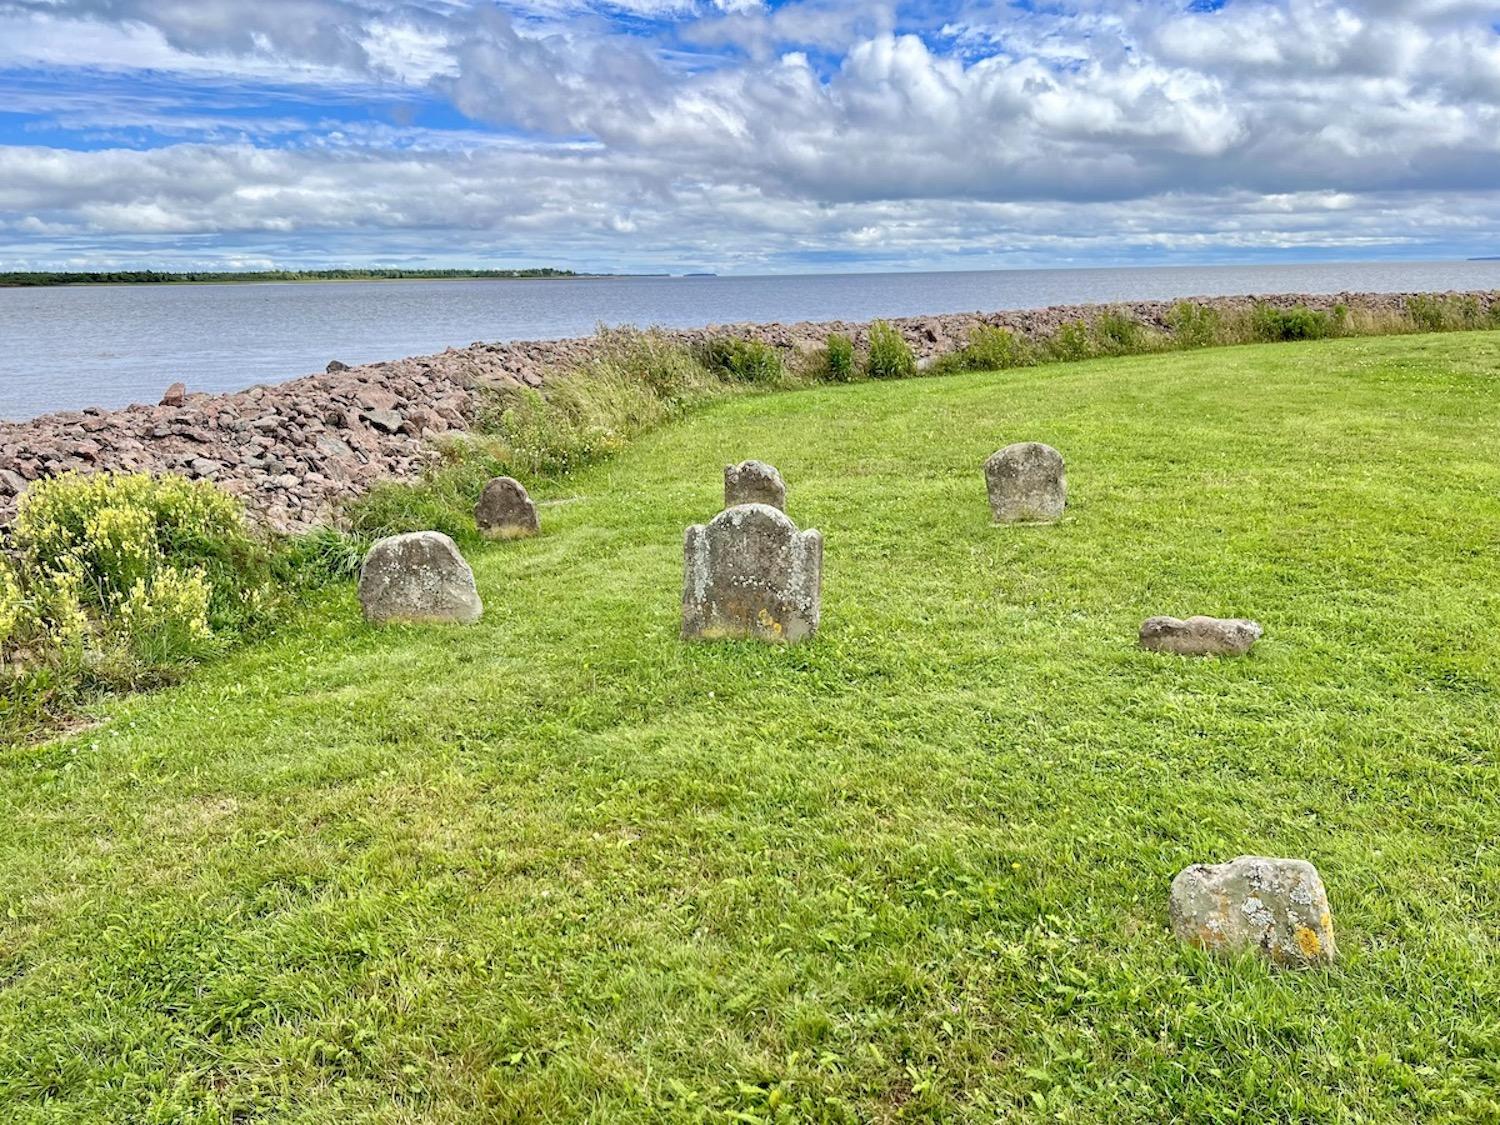 What's left of nine graves of Fort Gaspareaux soldiers.